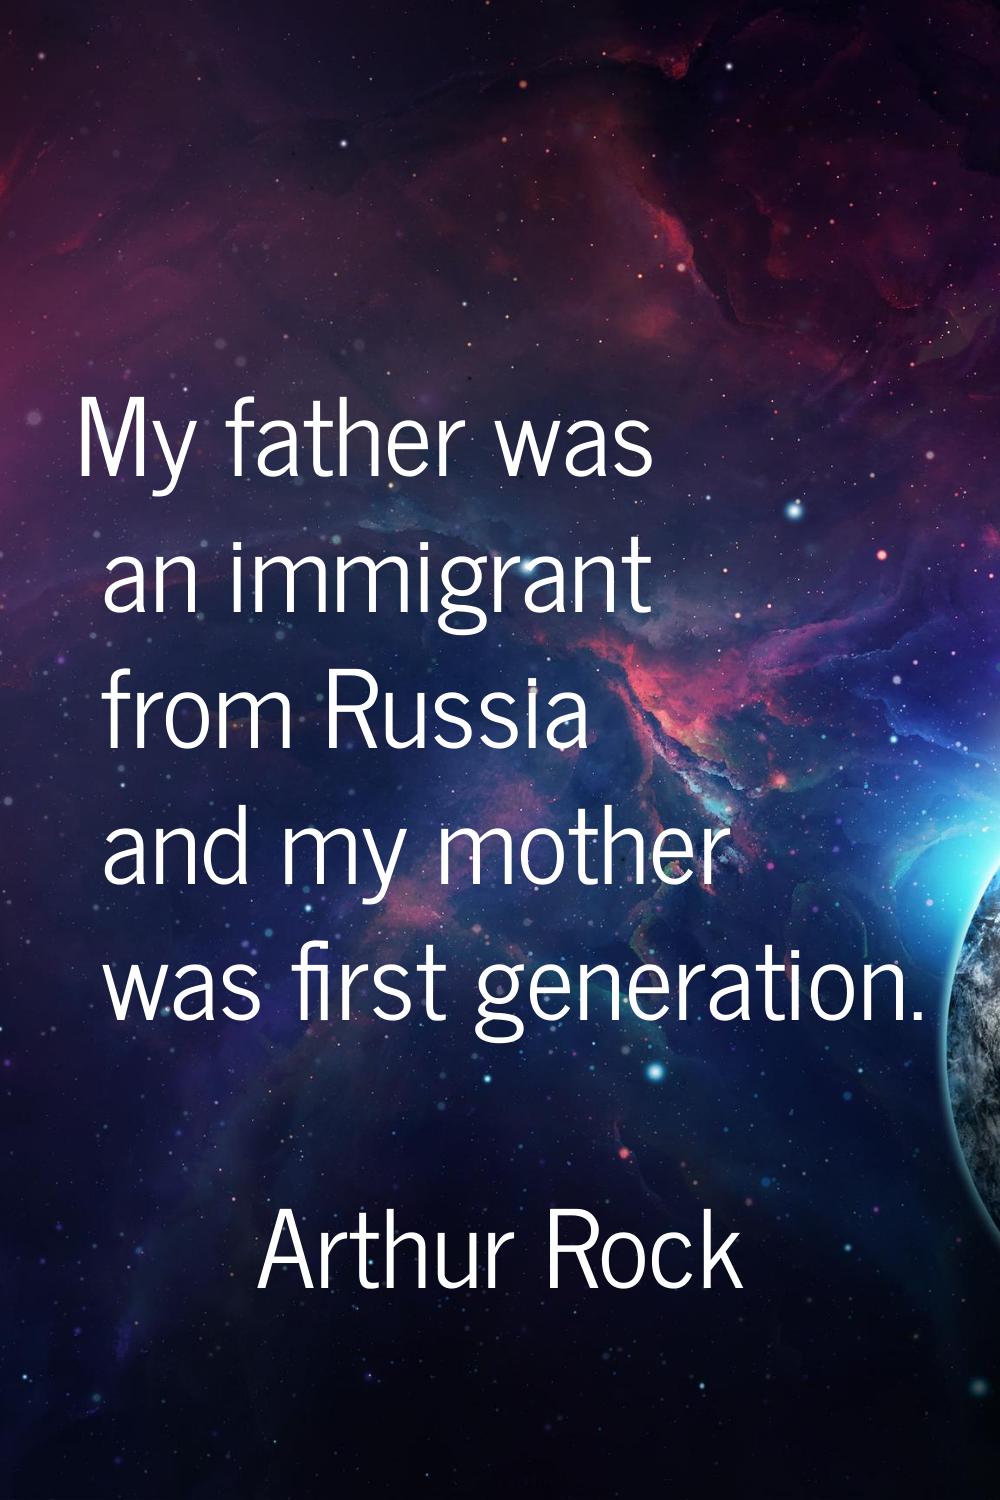 My father was an immigrant from Russia and my mother was first generation.